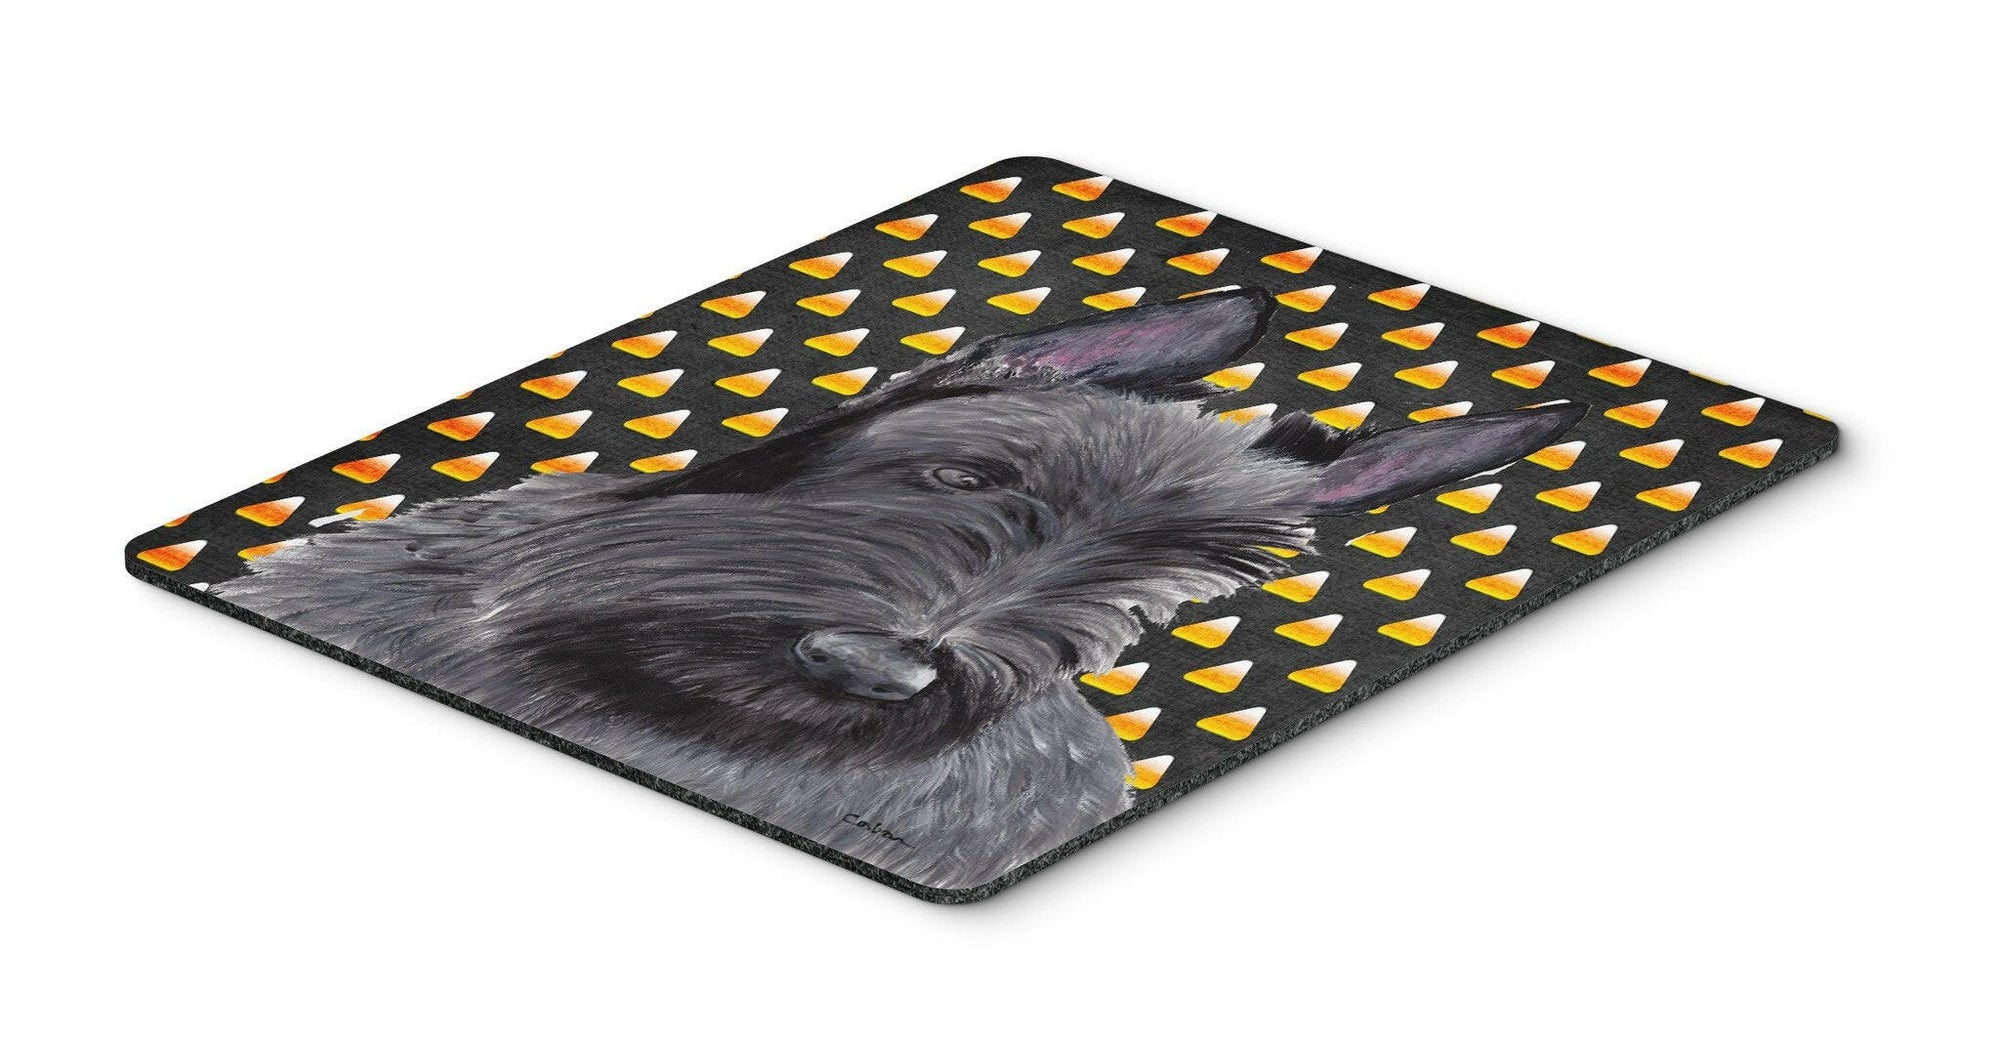 Scottish Terrier Candy Corn Halloween Portrait Mouse Pad, Hot Pad or Trivet by Caroline's Treasures